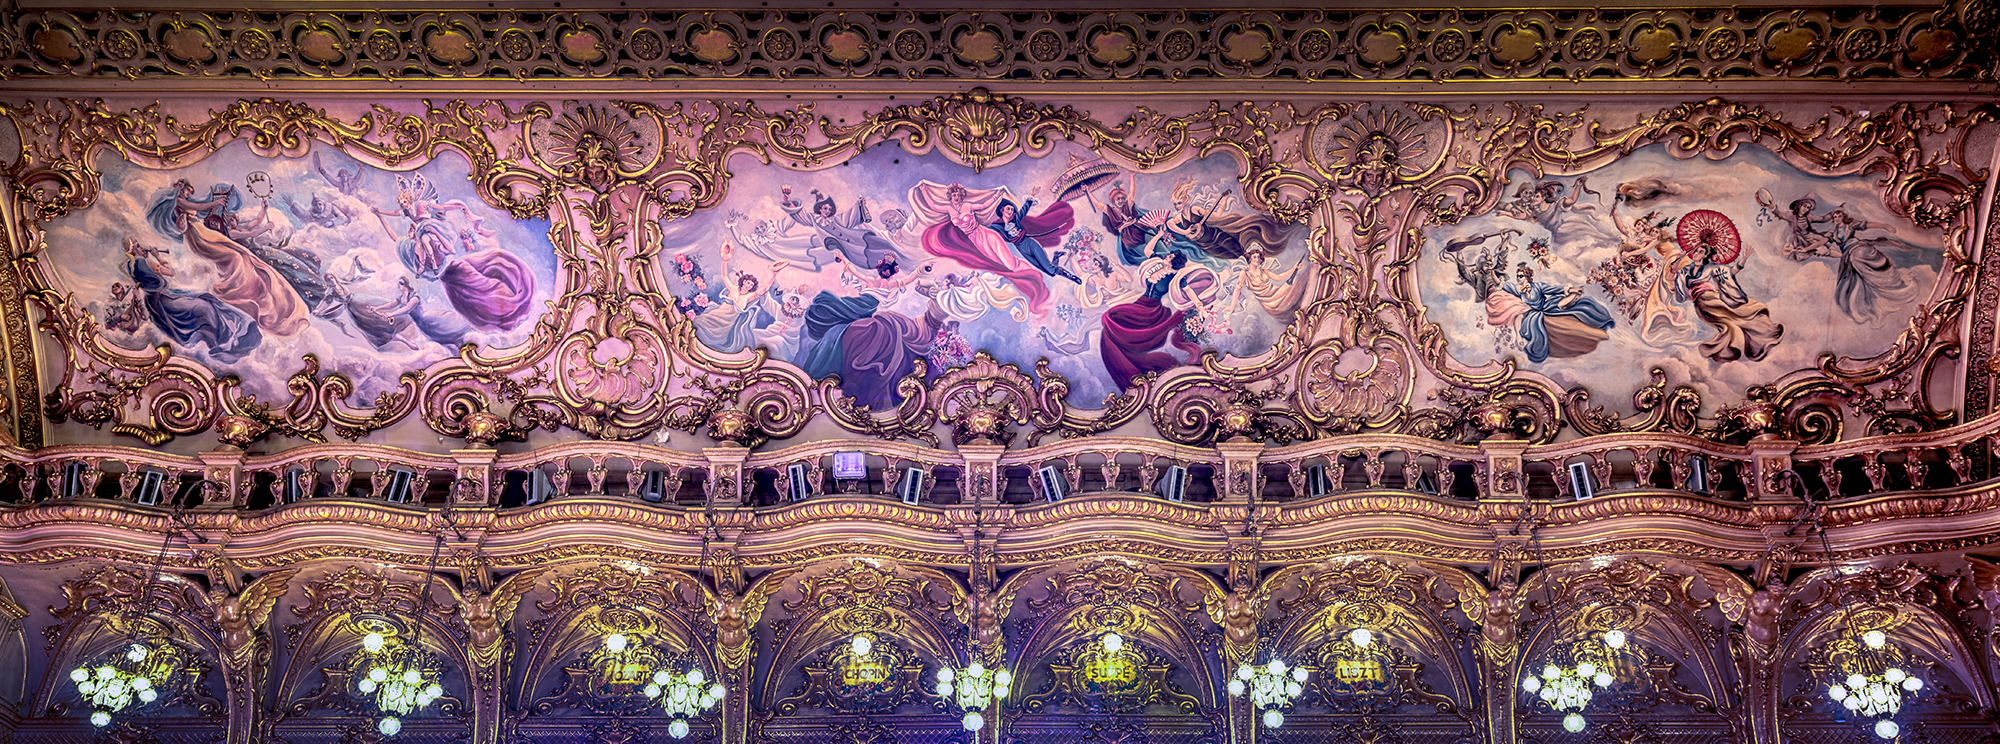 Detail of the ceiling inside Blackpool Tower Ballroom